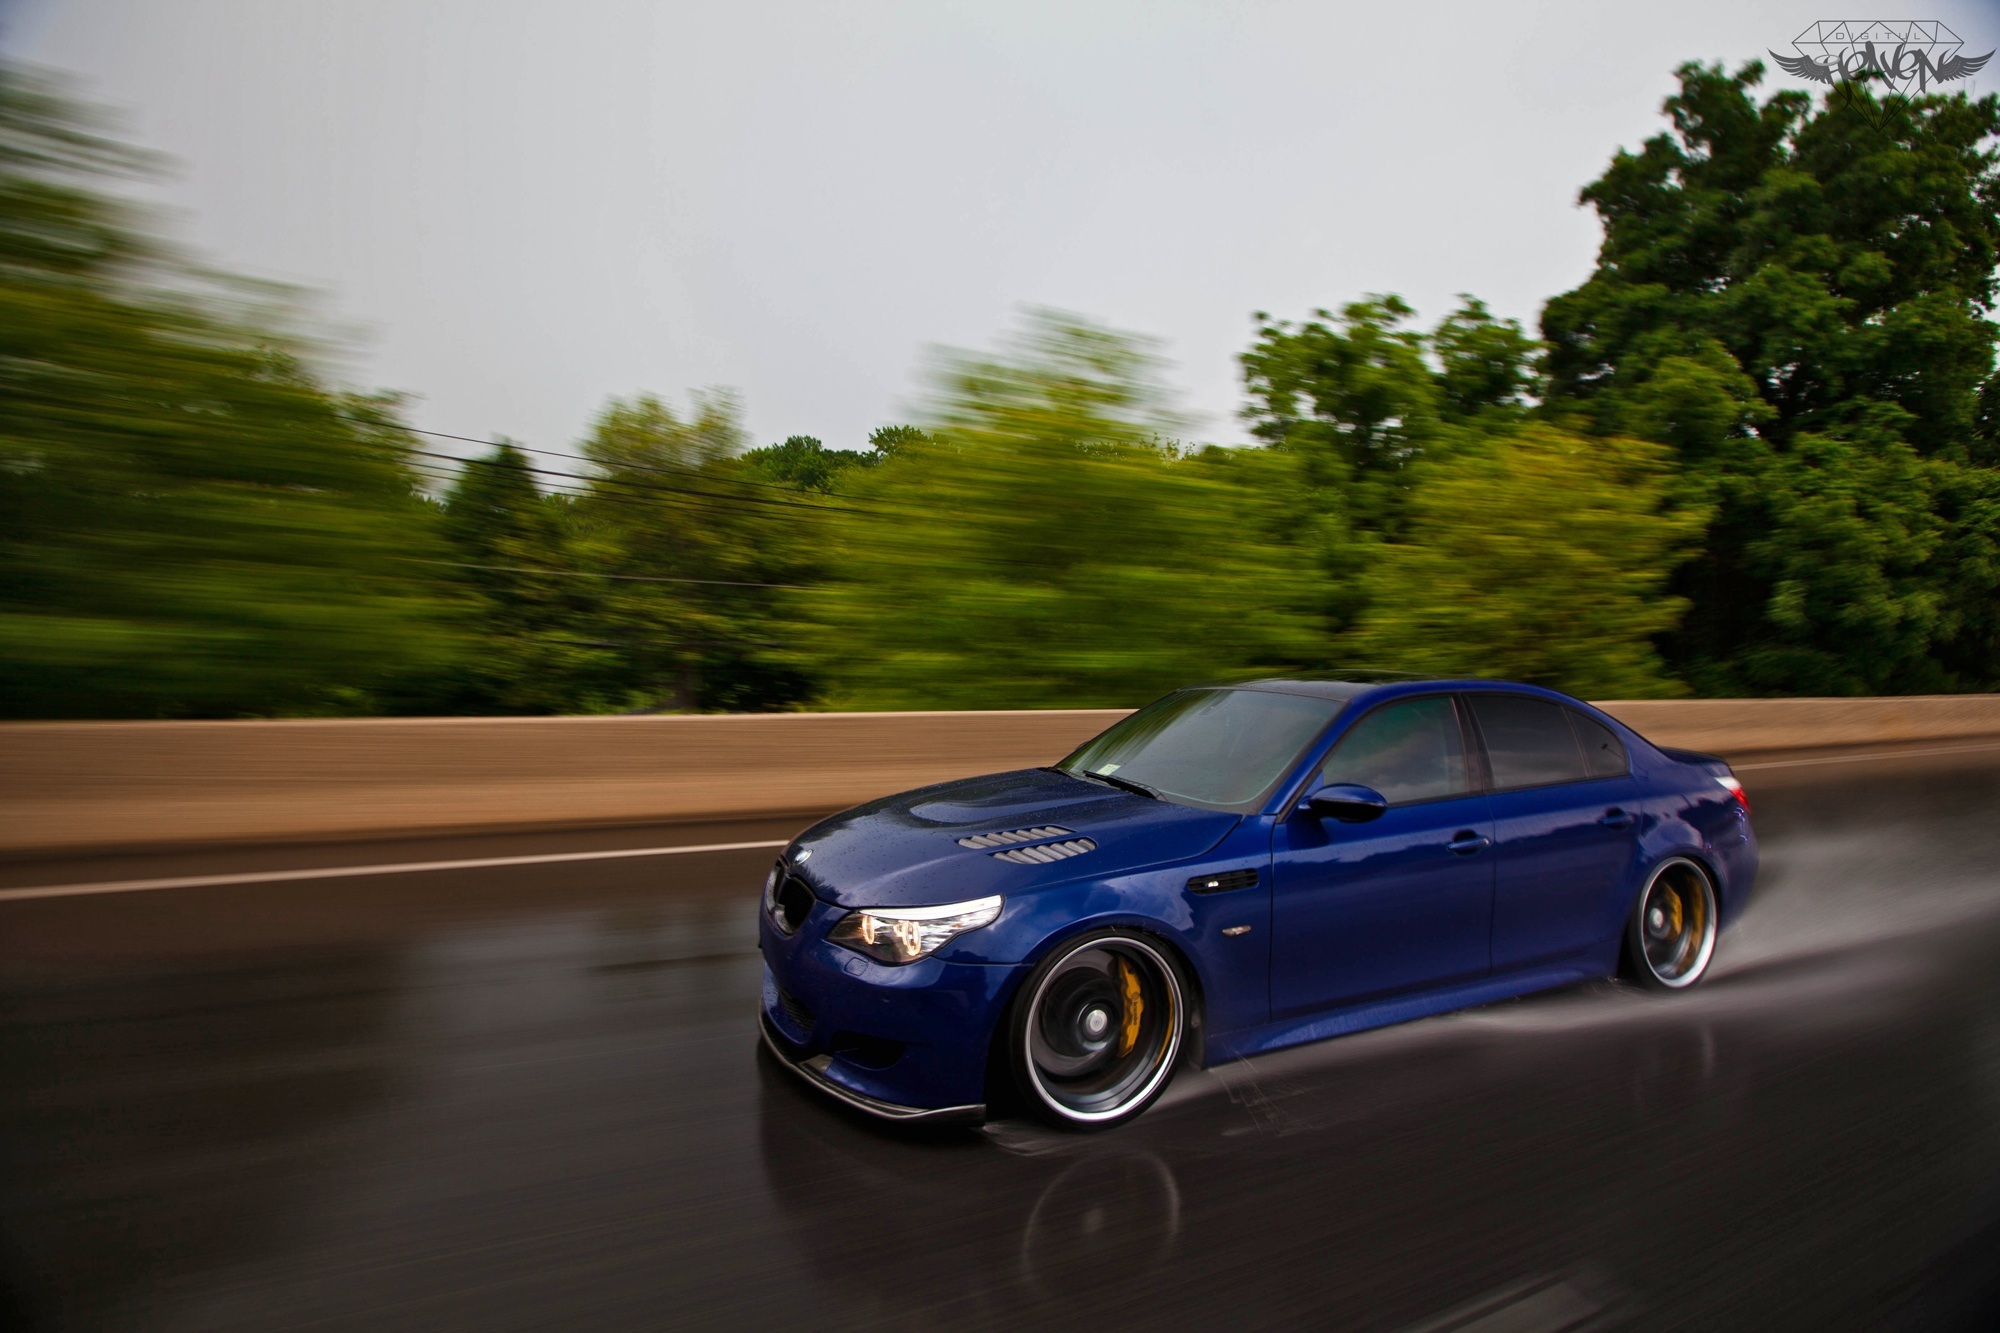 Modified BMW M5 E60 With 440whp